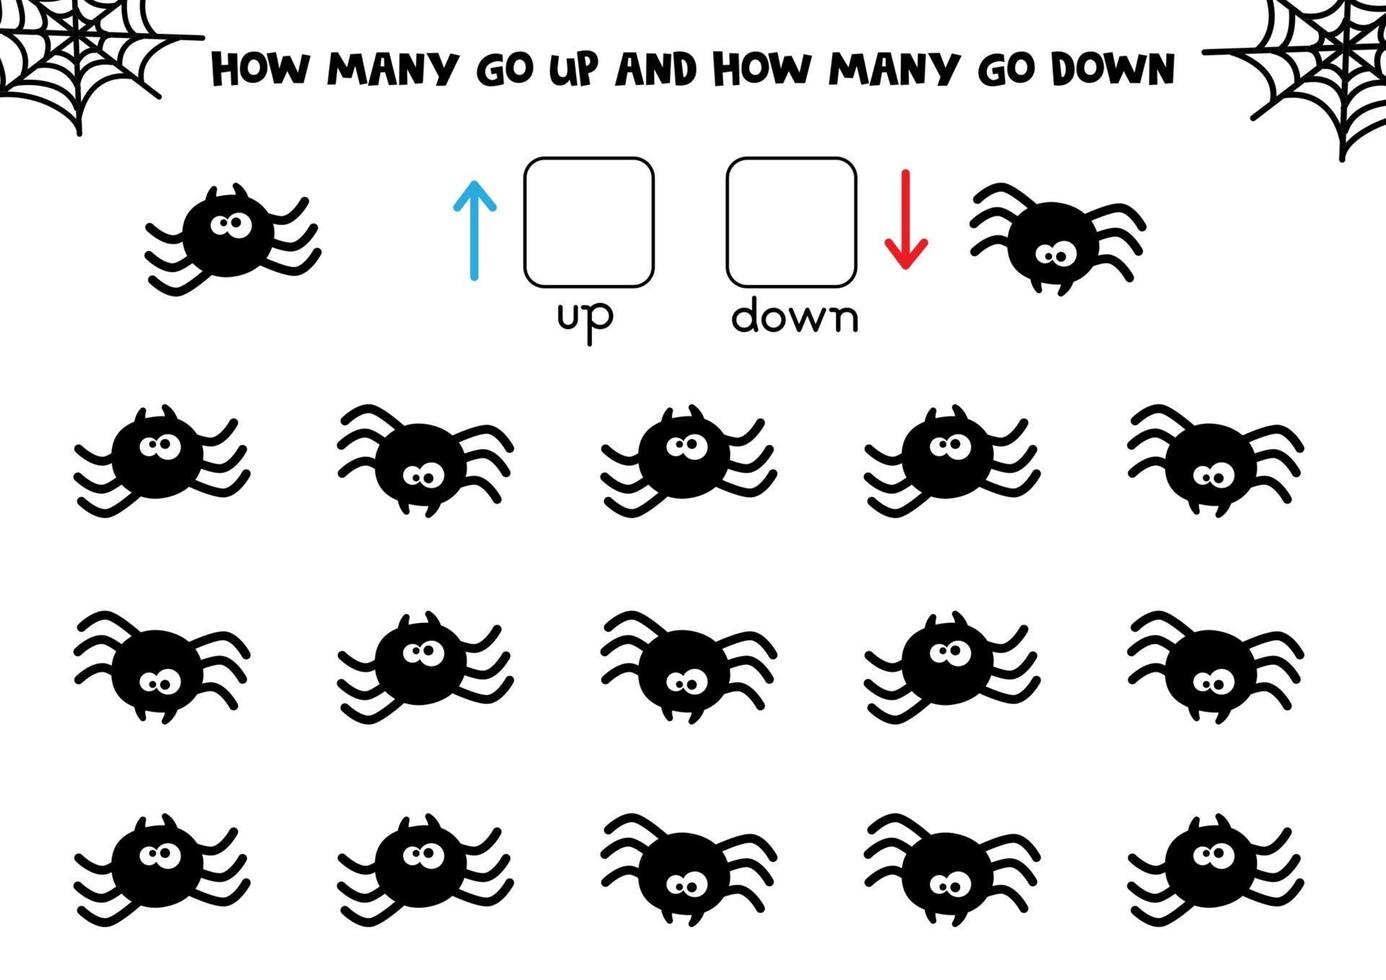 How many black spiders go up and down. Counting game for kids. vector